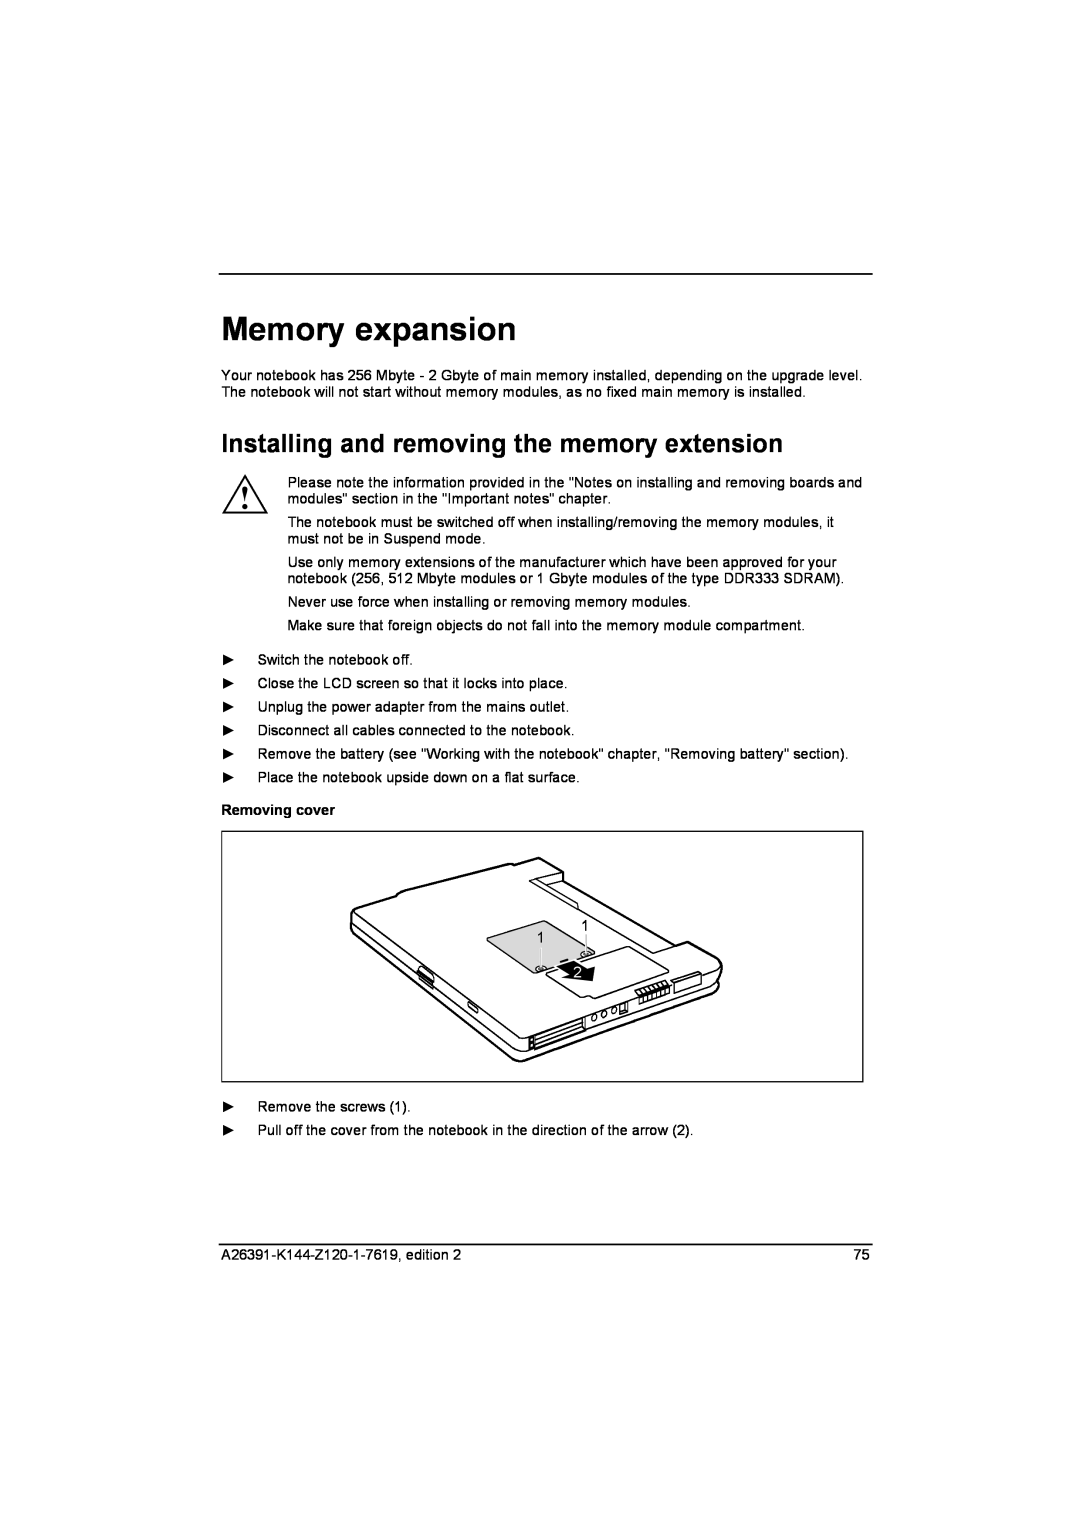 Fujitsu S SERIES manual Memory expansion, Installing and removing the memory extension, Removing cover 